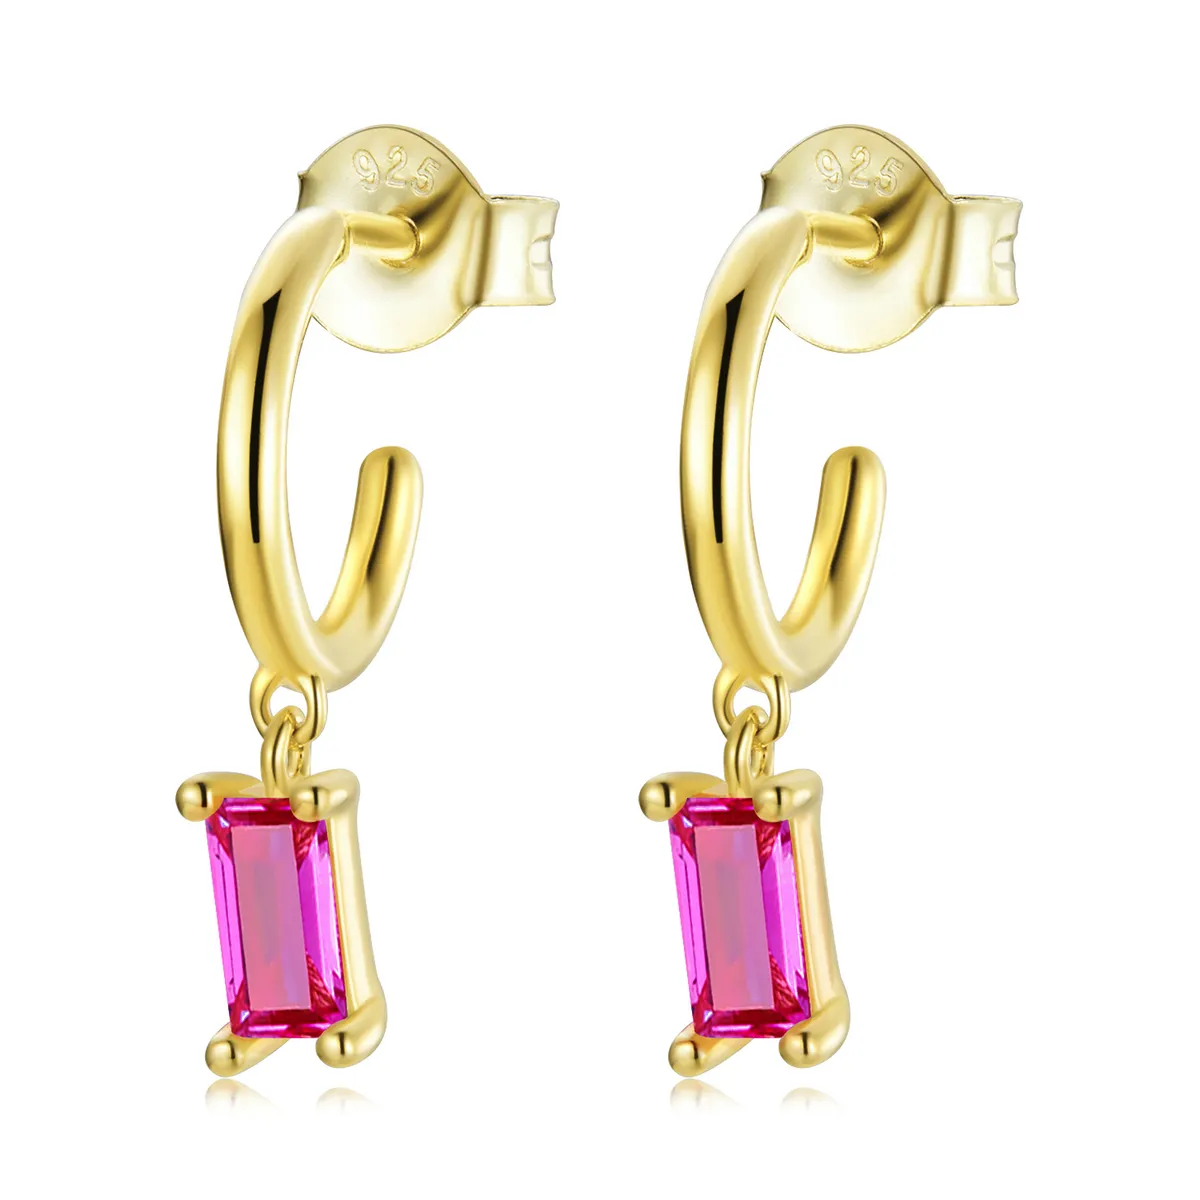 Pandora Style Colorful Cubic Zirconium - Pink Hanging Earrings - SCE1242-RD